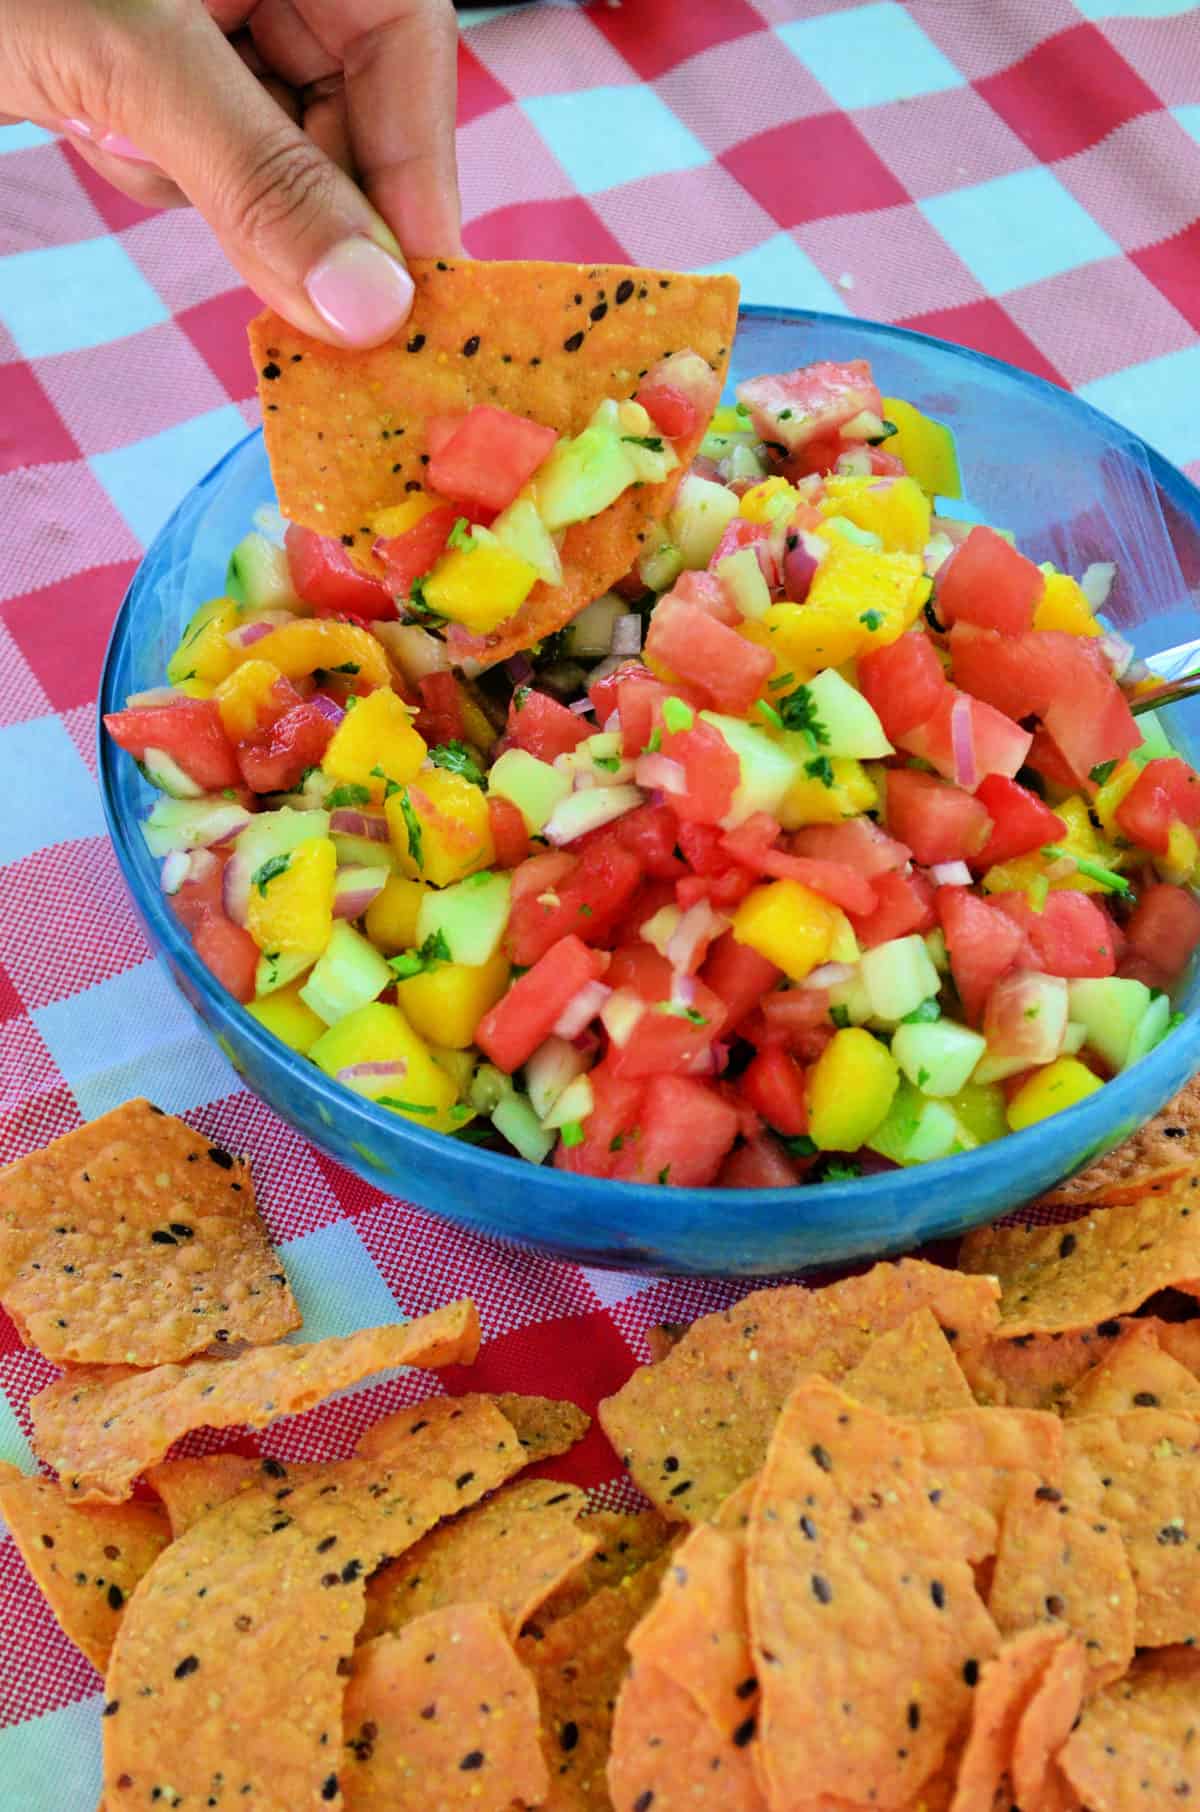 Hand dipping chip into watermelon salsa with red onions, mangos, watermelon and green herbs most visible.